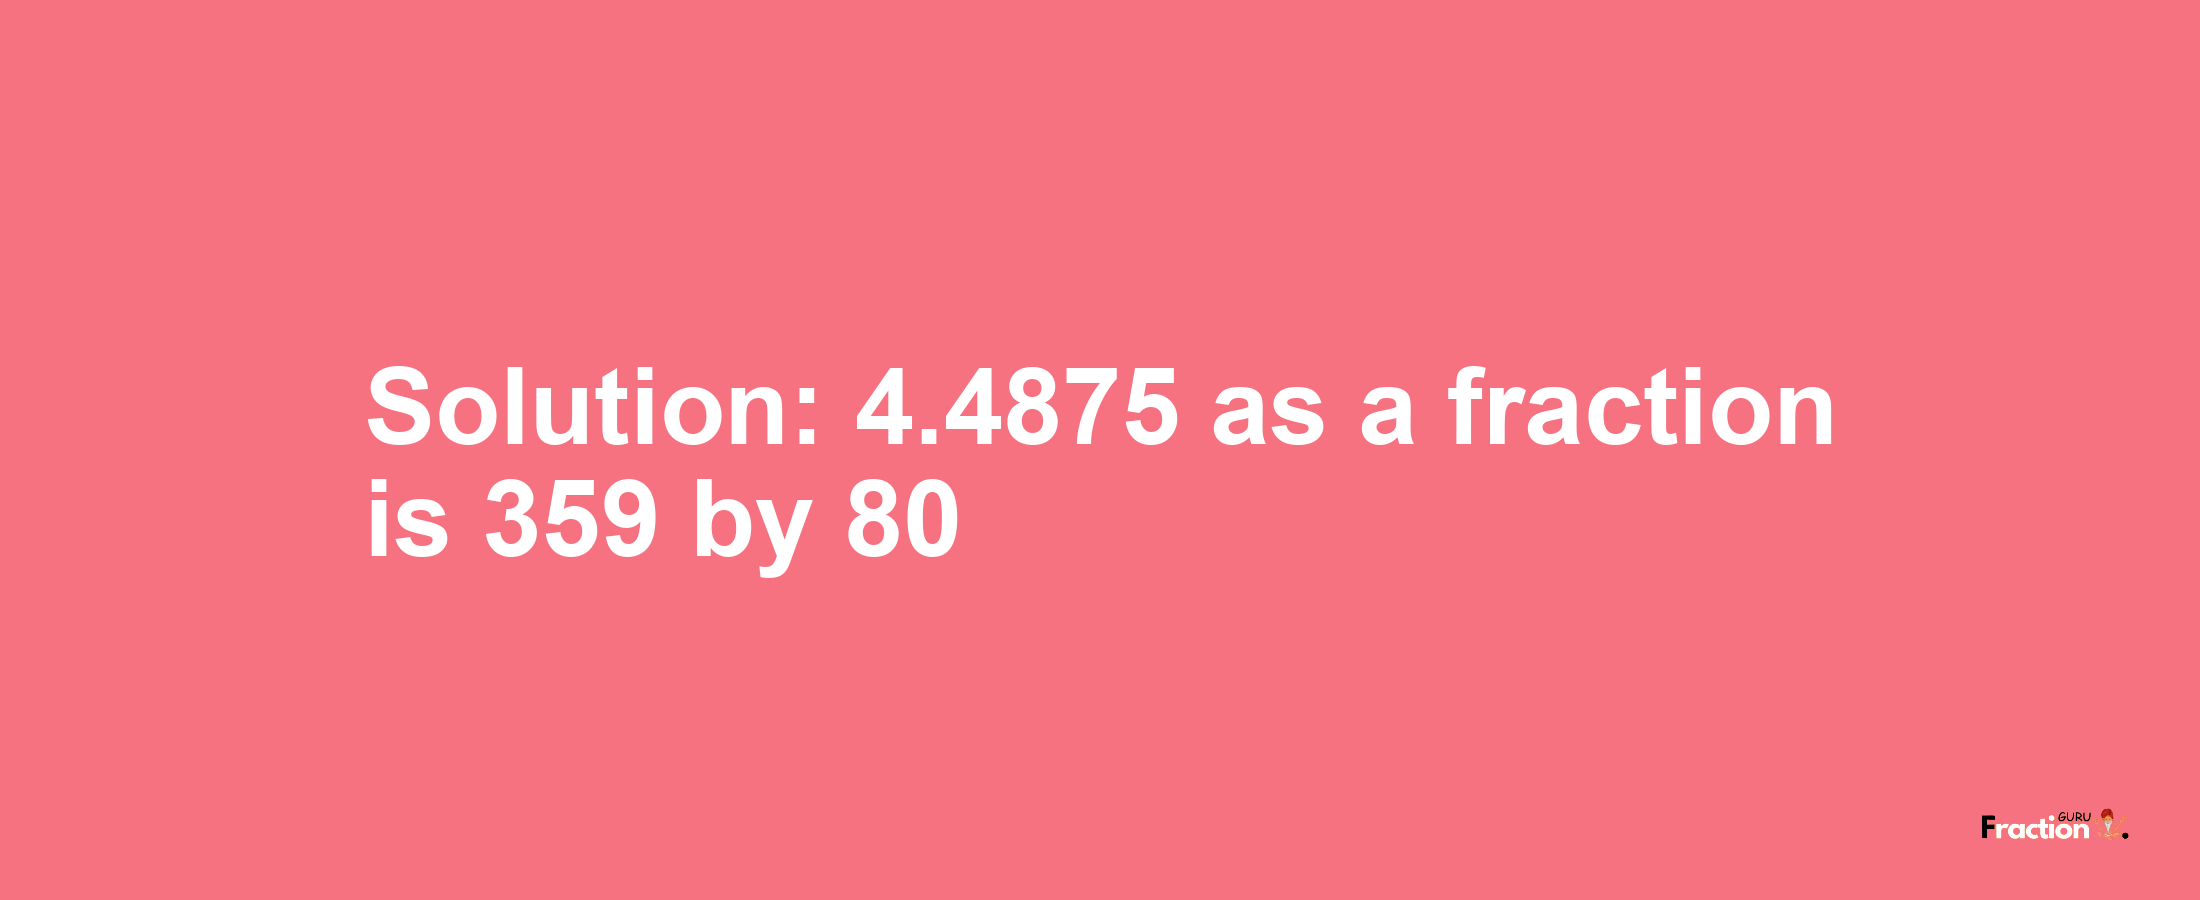 Solution:4.4875 as a fraction is 359/80